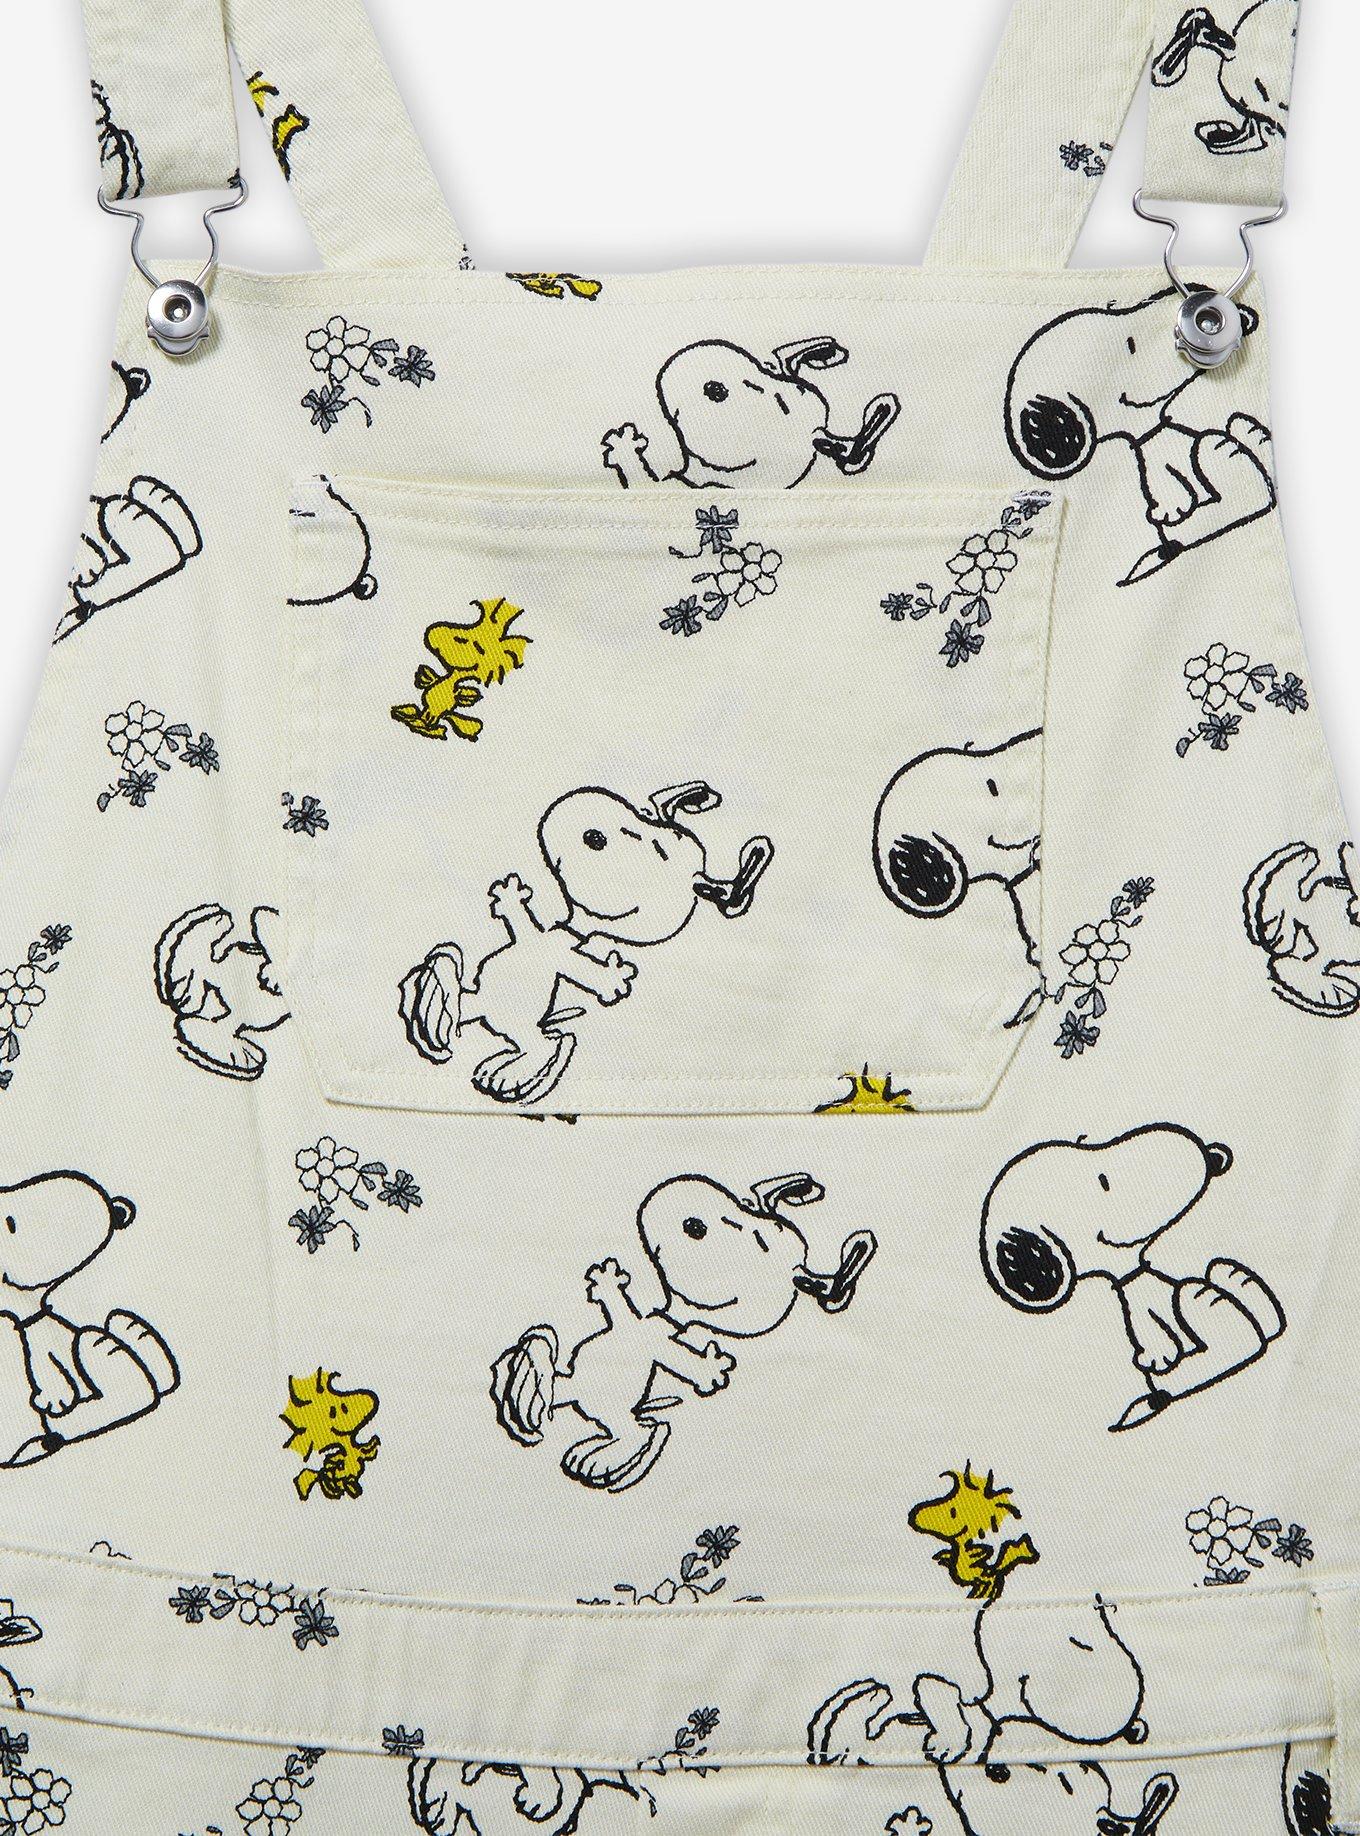 Peanuts Snoopy And Woodstock Allover Print Overalls Plus Size, MULTI, alternate